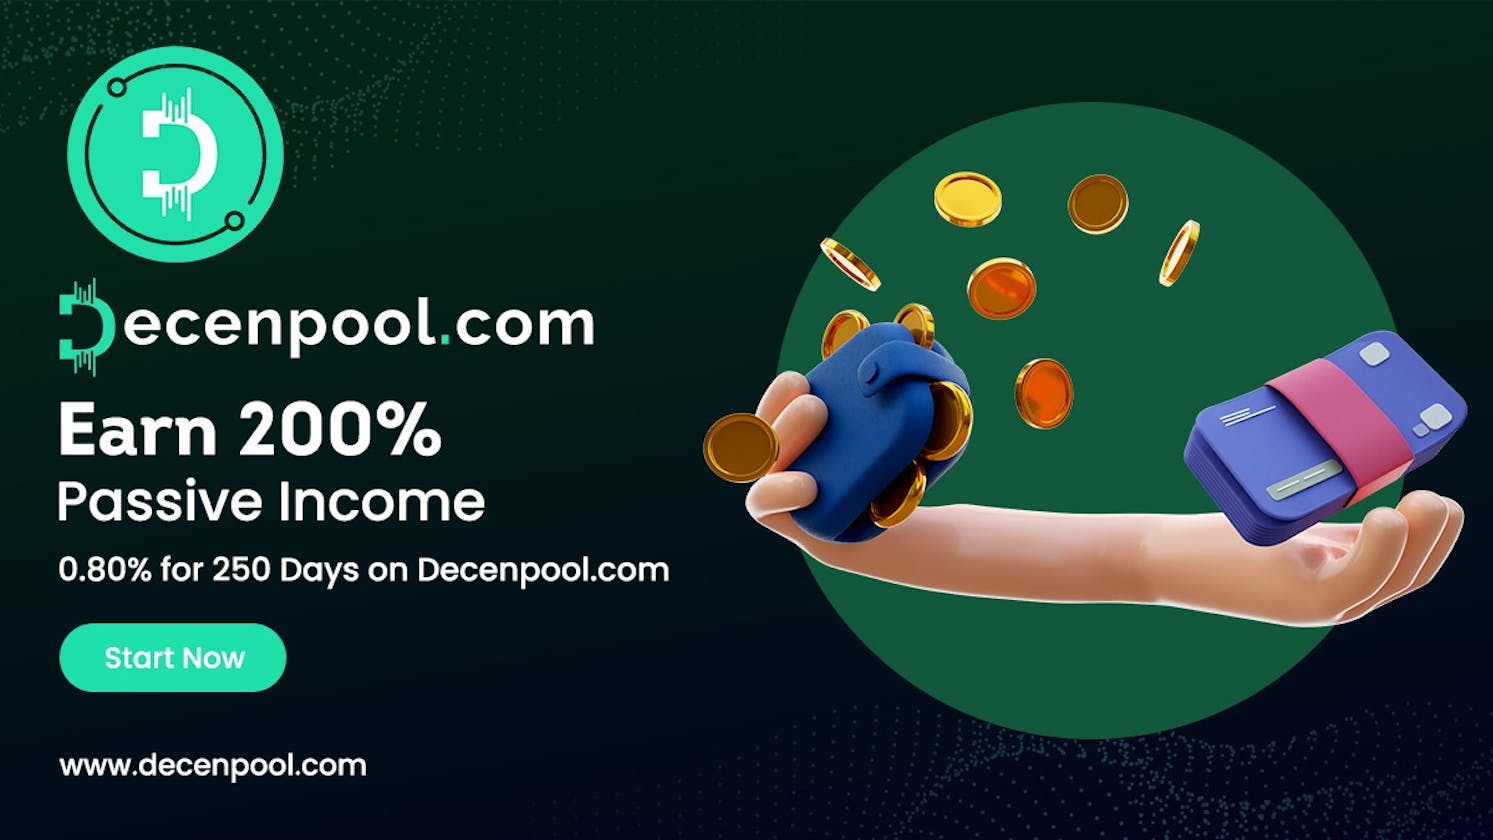 What is DecenPool Passive Earning? Let’s Take a Quick Look!